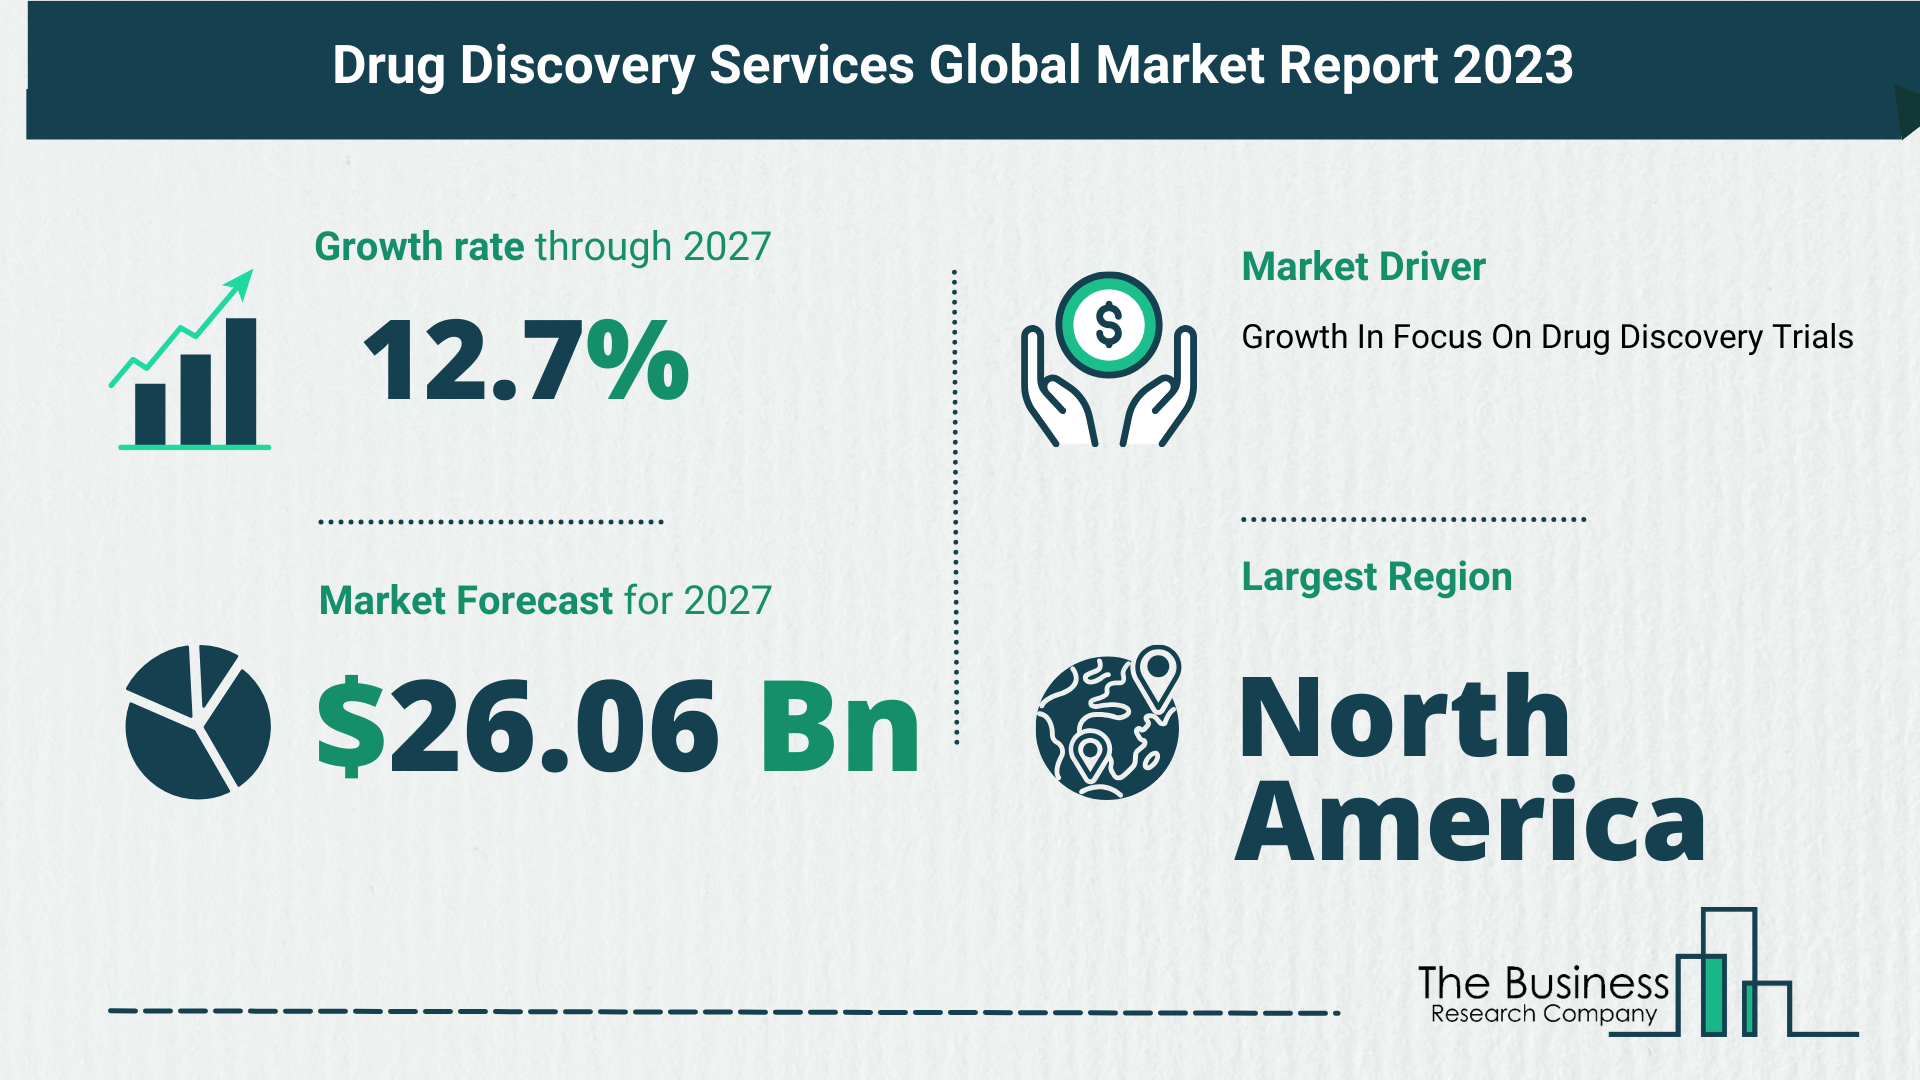 Global Drug Discovery Services Market